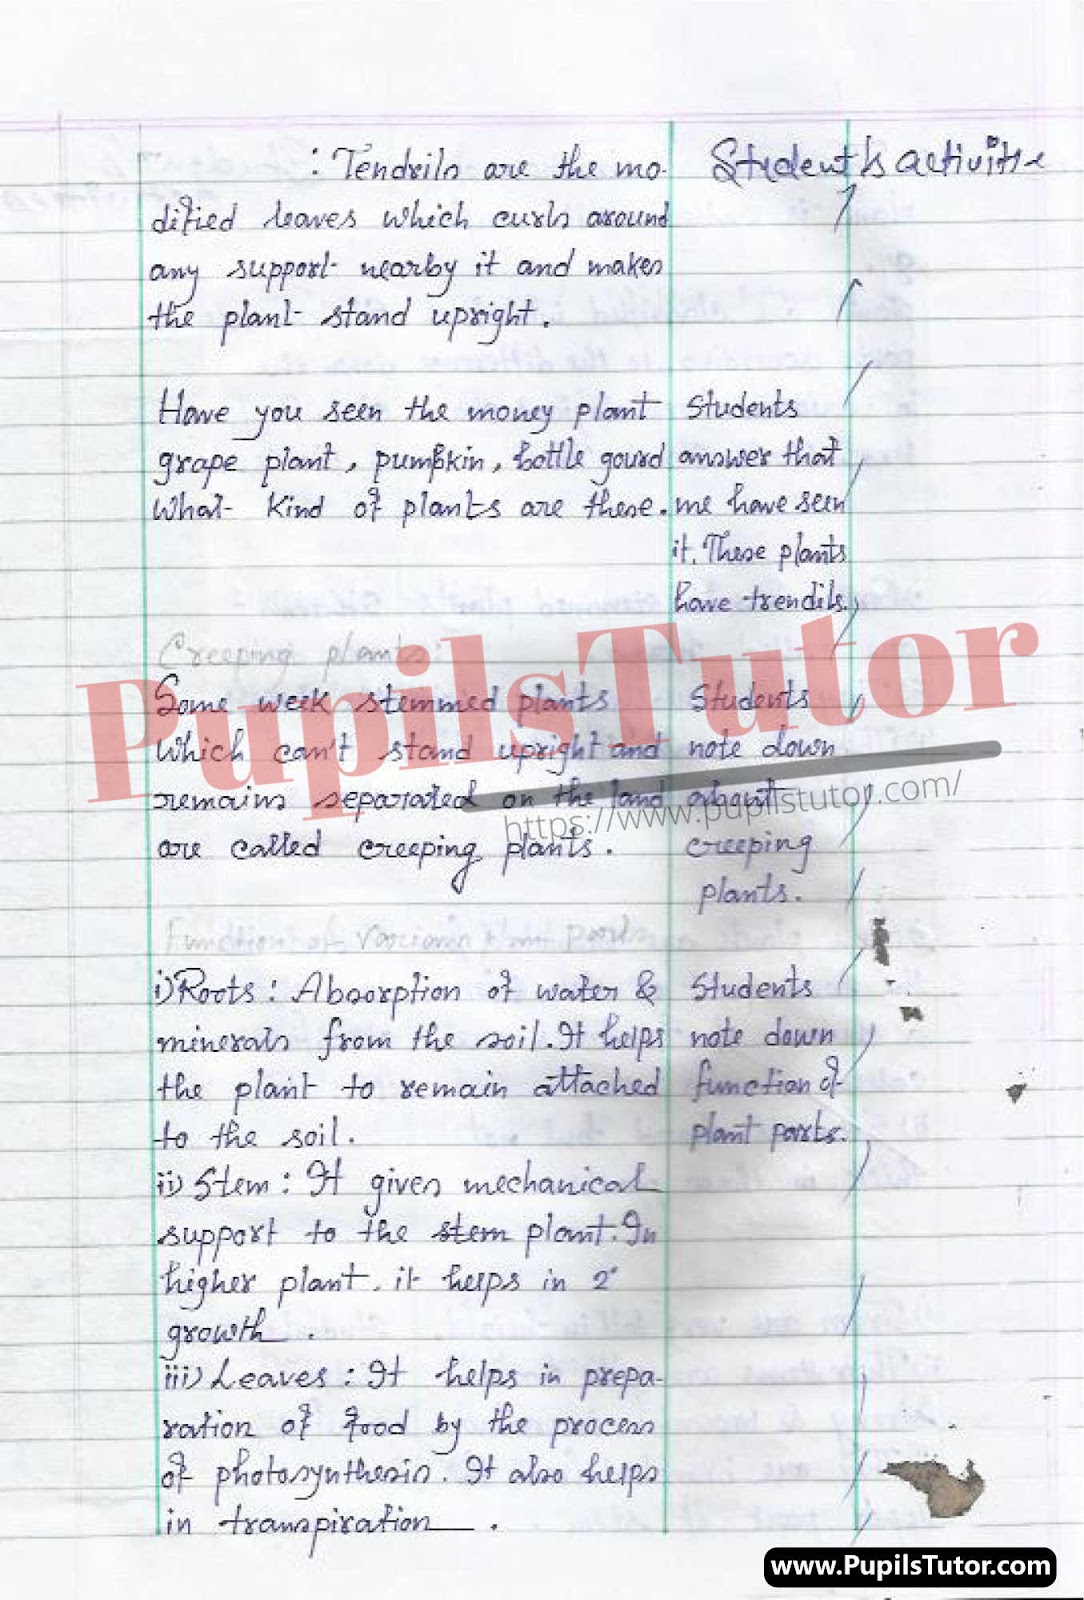 BED, DELED, BTC, BSTC, M.ED, DED And NIOS Teaching Of Biological Science  Innovative Digital Lesson Plan Format On Plants And Their Classification Topic For Class 4th 5th 6th 7th 8th 9th, 10th, 11th, 12th  – [Page And Photo 4] – pupilstutor.com